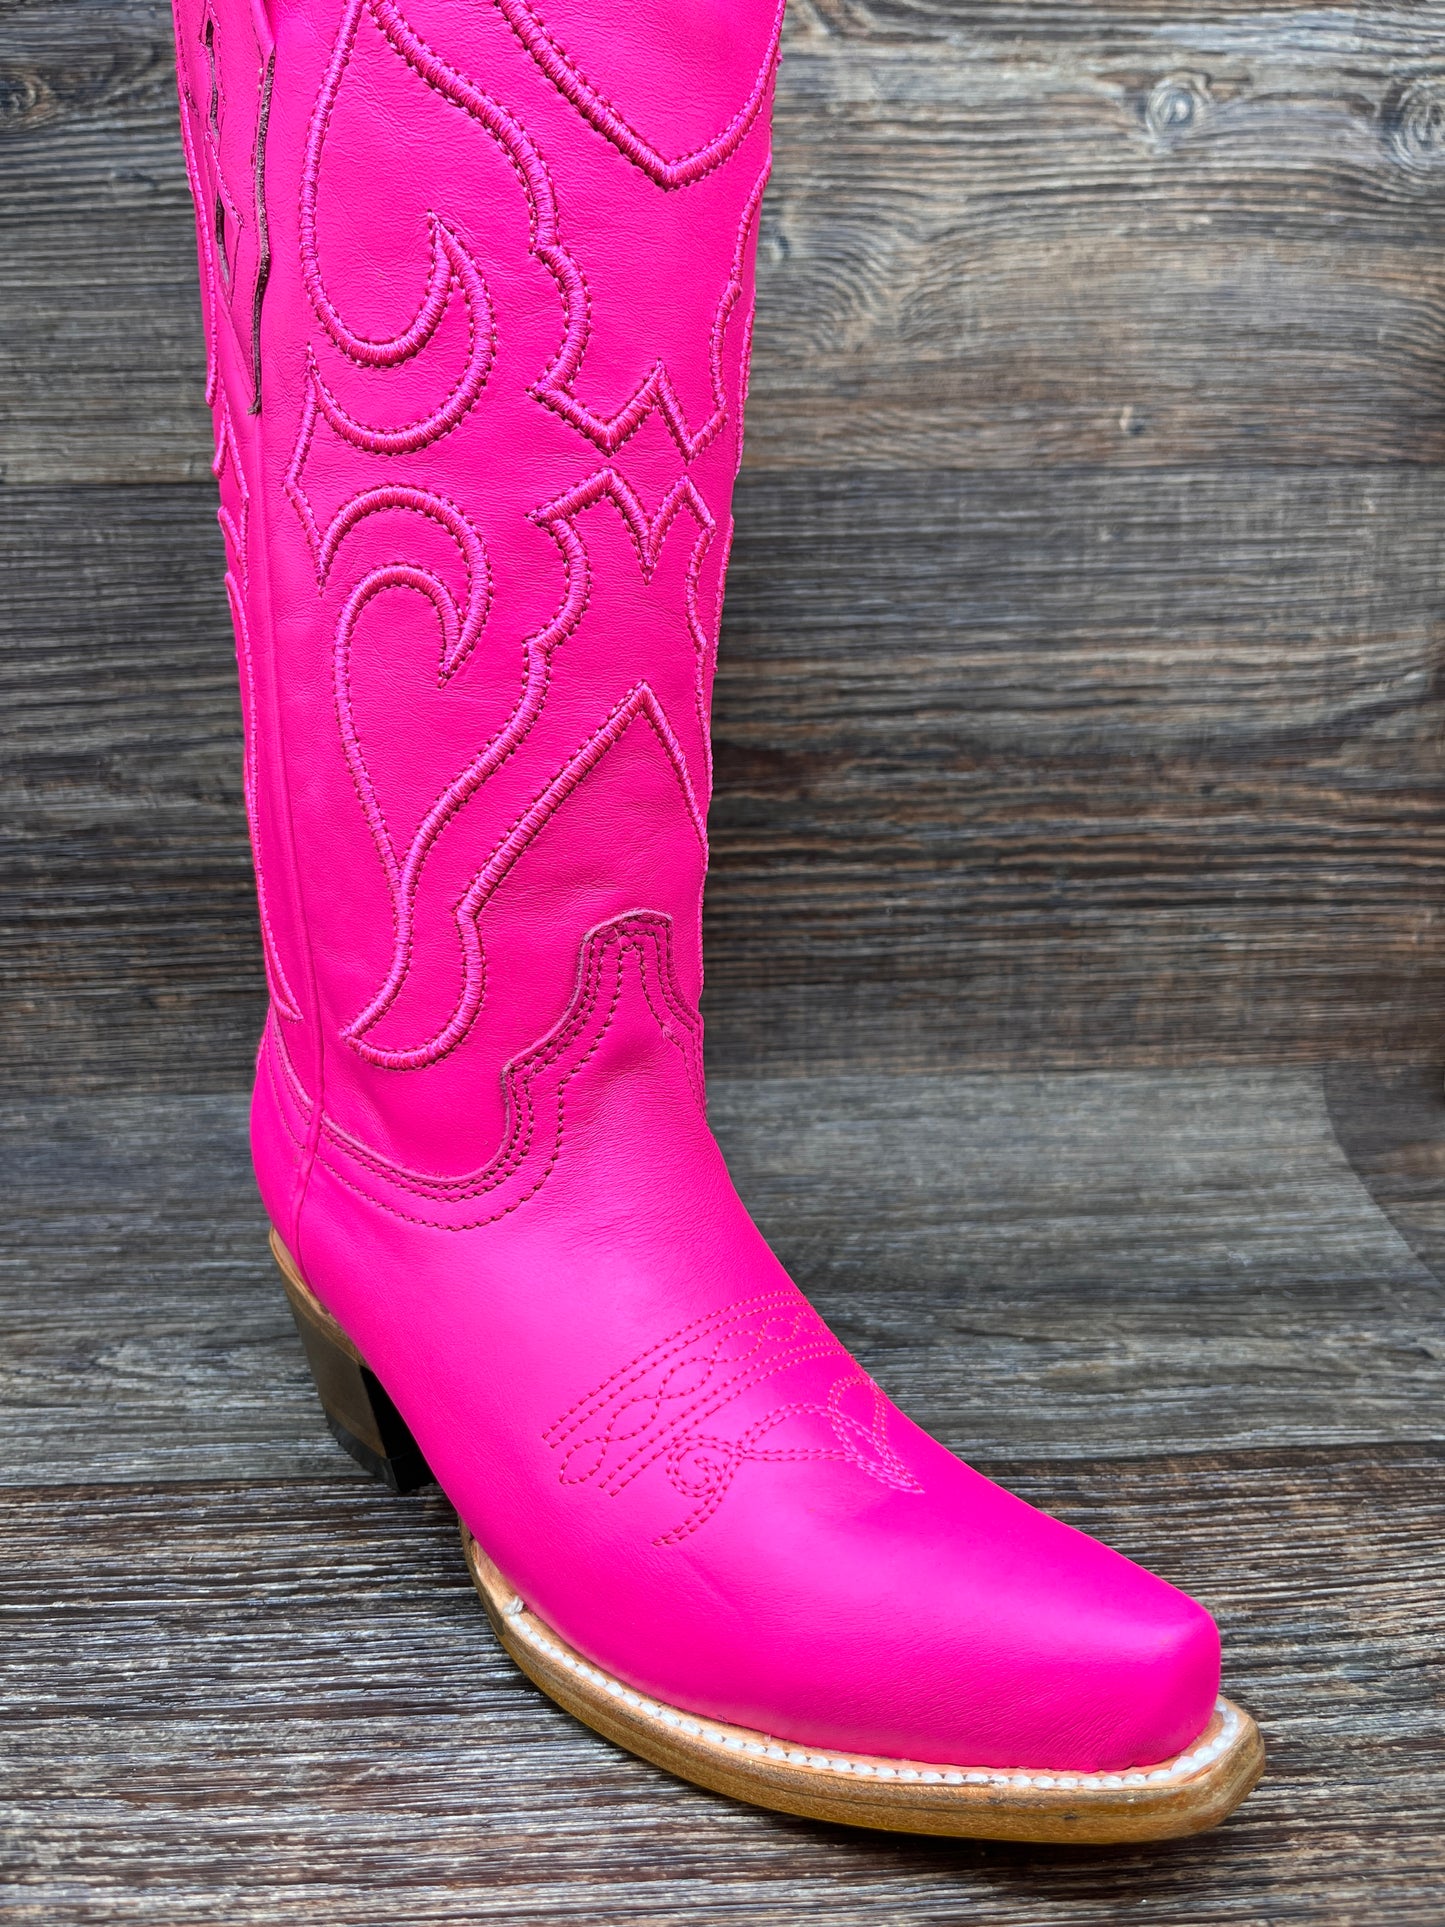 Z5138 Women's Hot Pink Embroidered Snip Toe Western Boot by Corral